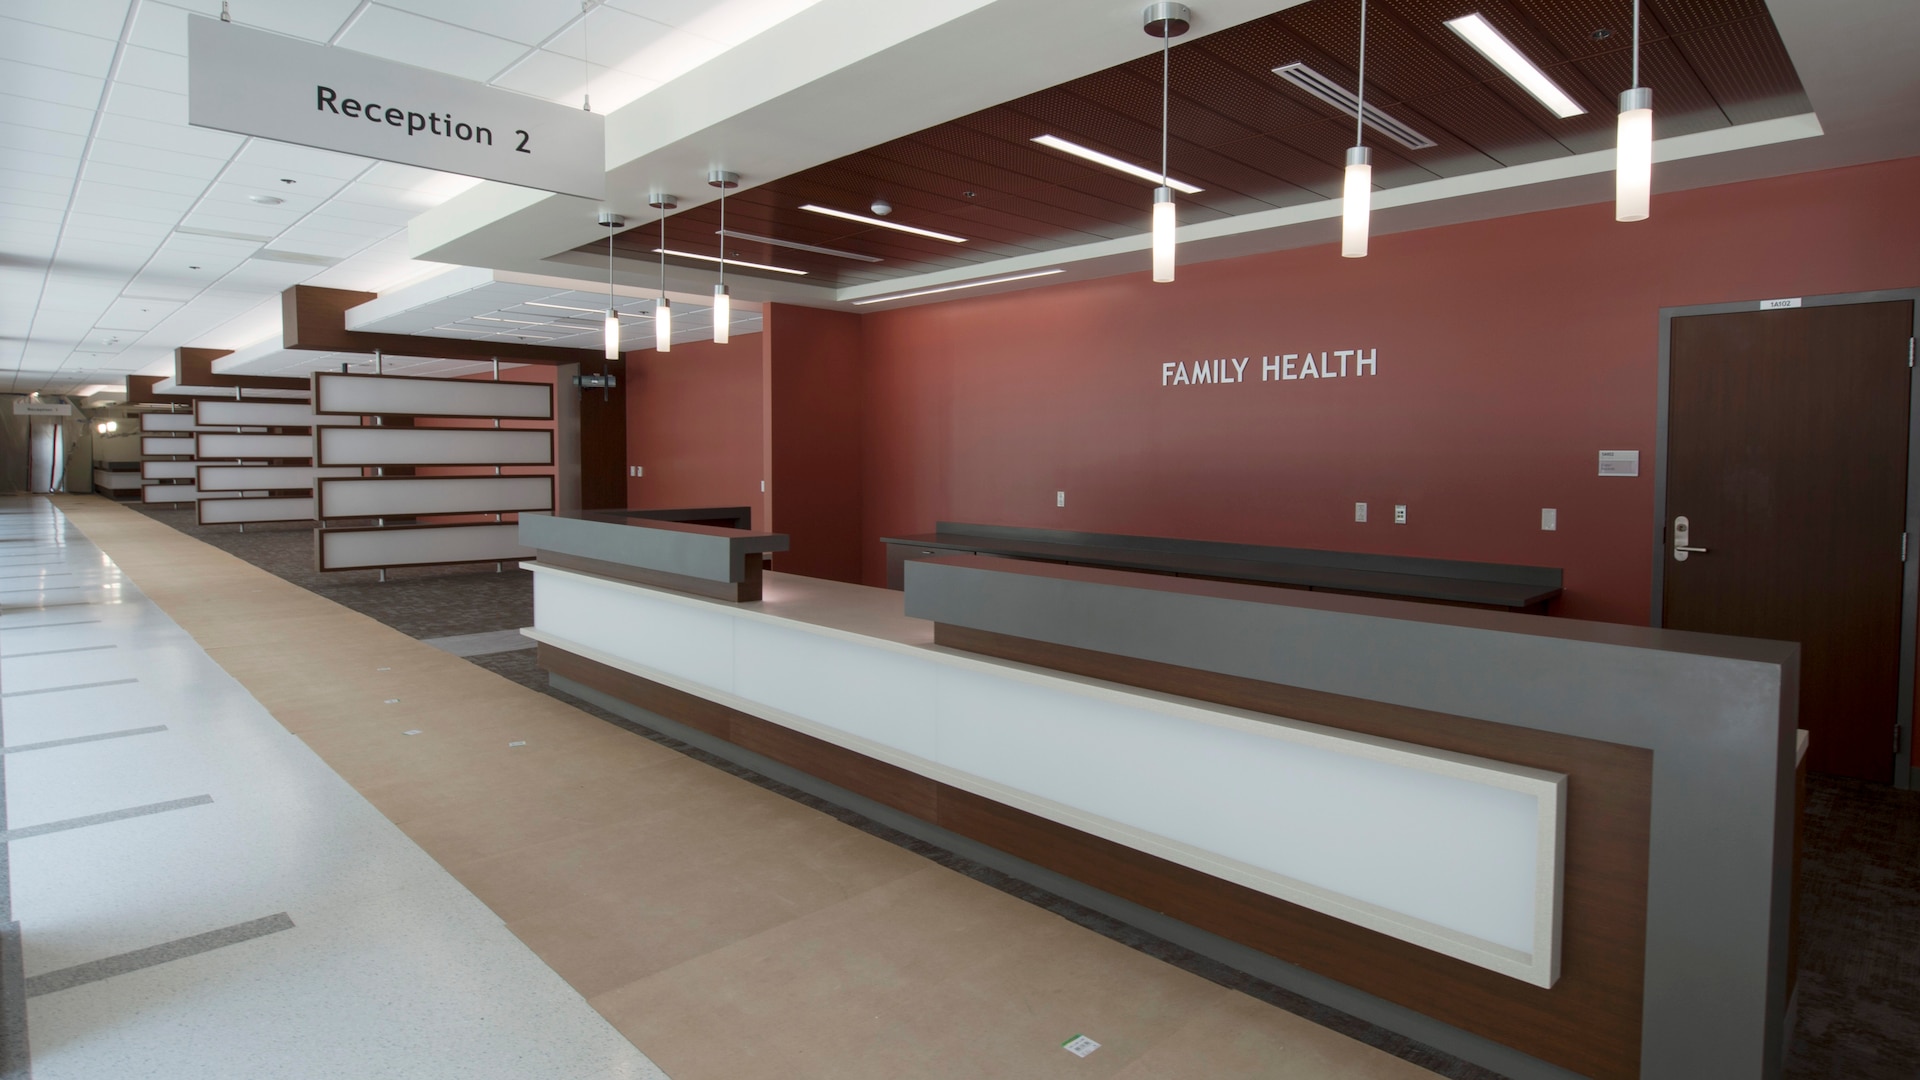 The new Wilford Hall Ambulatory Surgical Center will contain two reception areas with multiple waiting areas for family health patients. (U.S. Air Force photo/Staff Sgt. Kevin Iinuma)